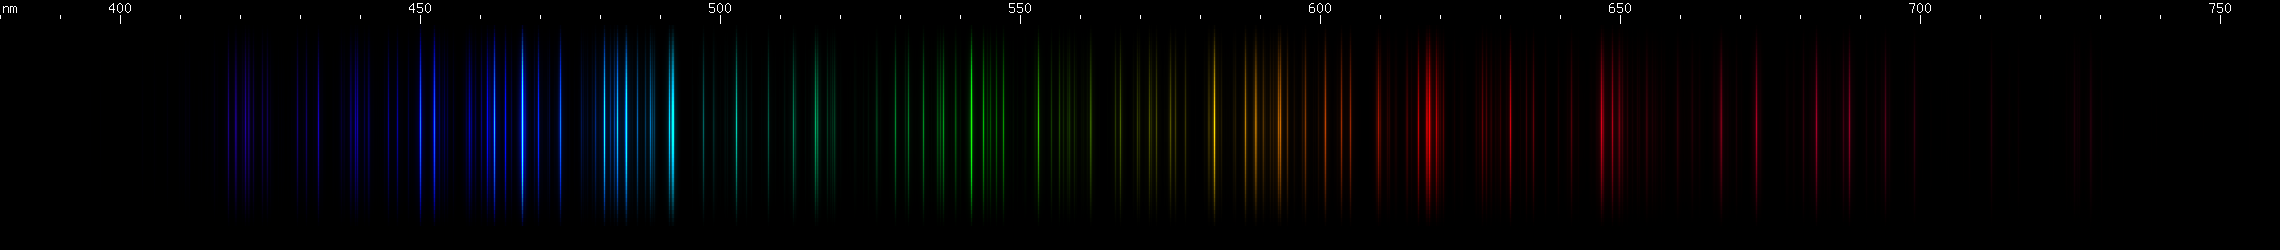 Spectral Lines of Xenon